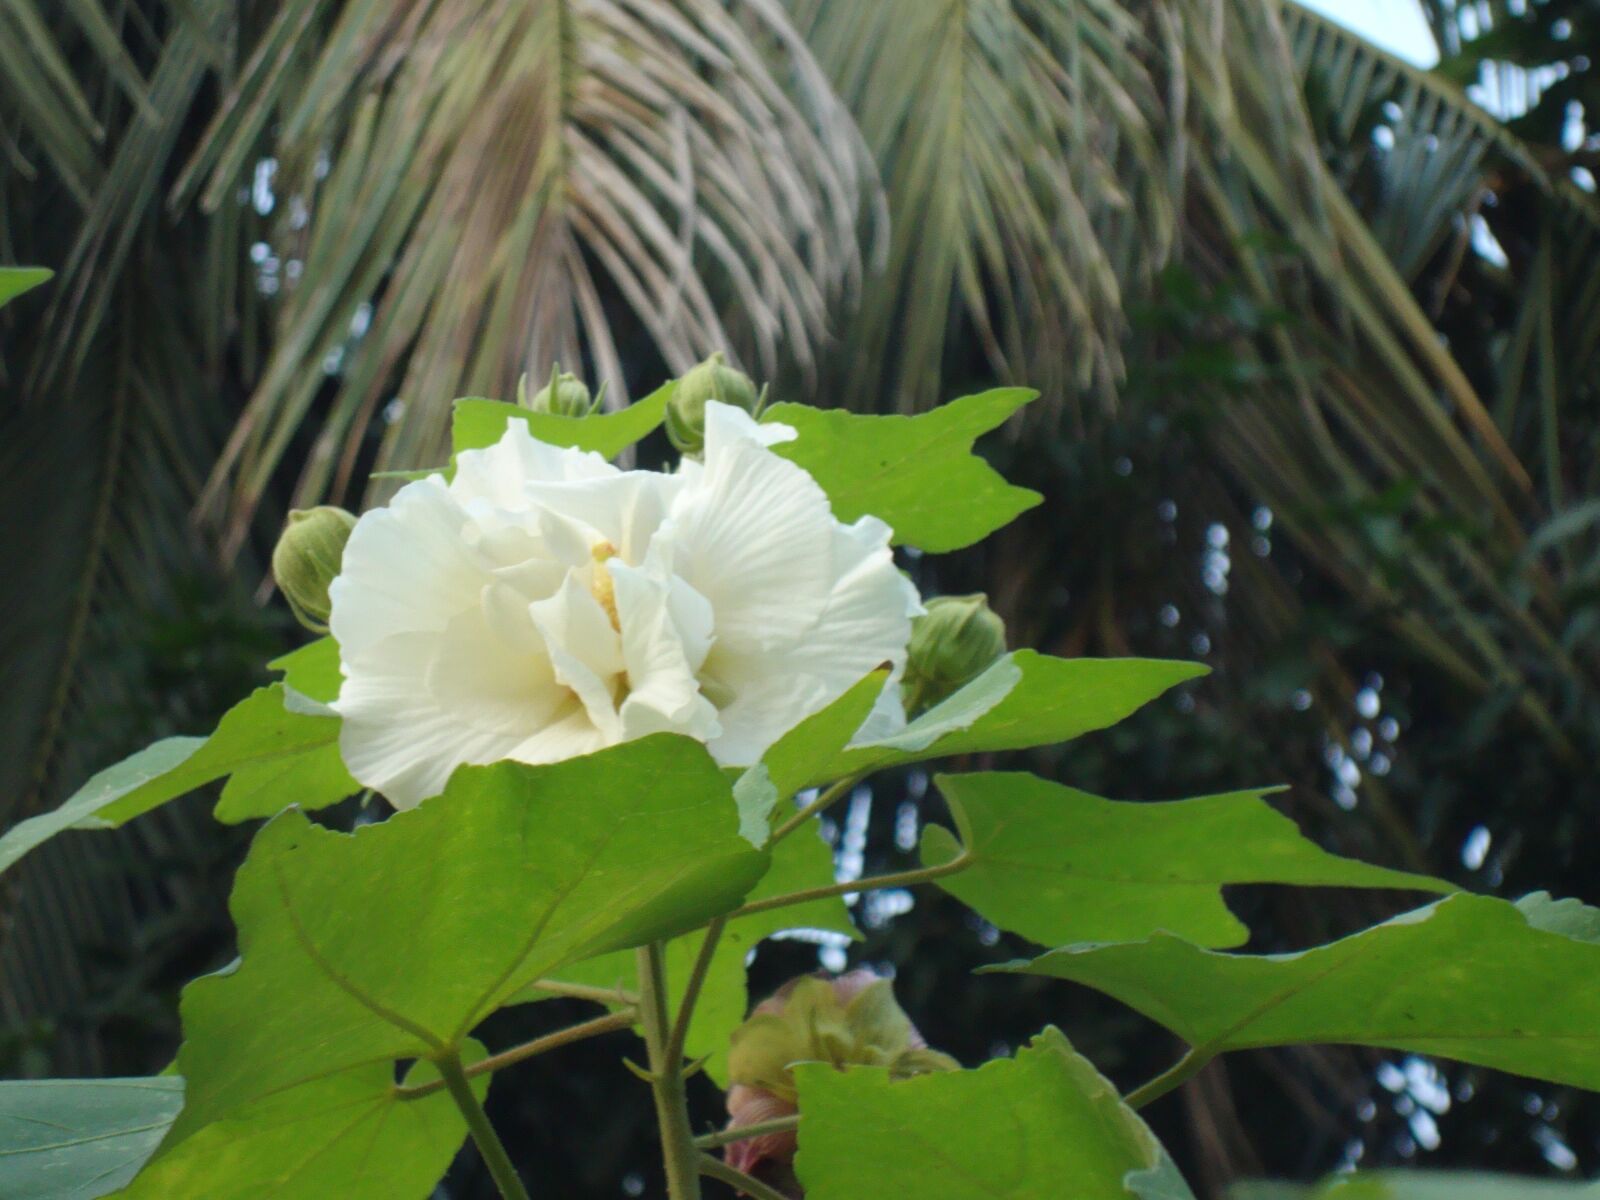 Sony Cyber-shot DSC-W220 sample photo. Confederate rose, west bengal photography